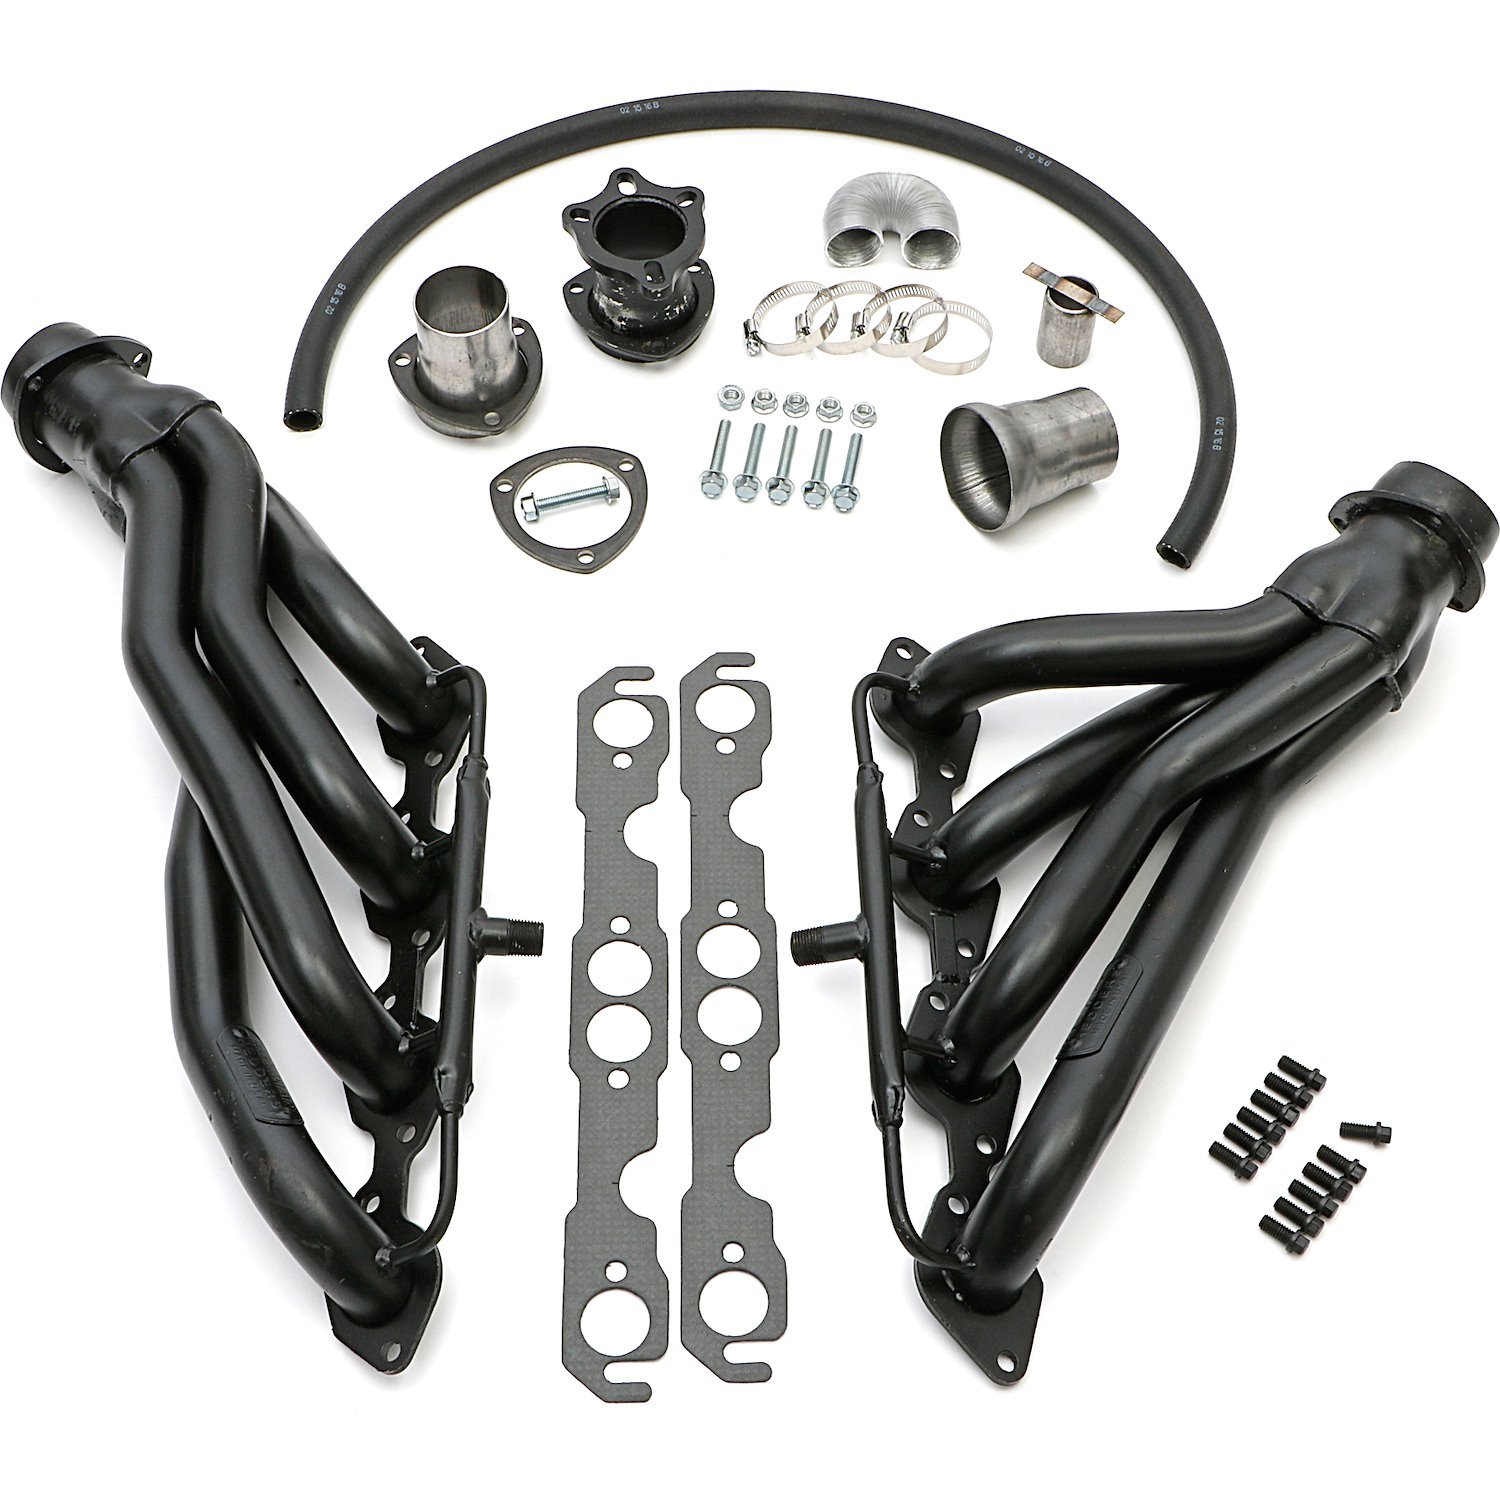 Standard Duty Uncoated Shorty Headers for 1965-81 Camaro, Chevelle, Monte Carlo, Chevy II, Nova and More